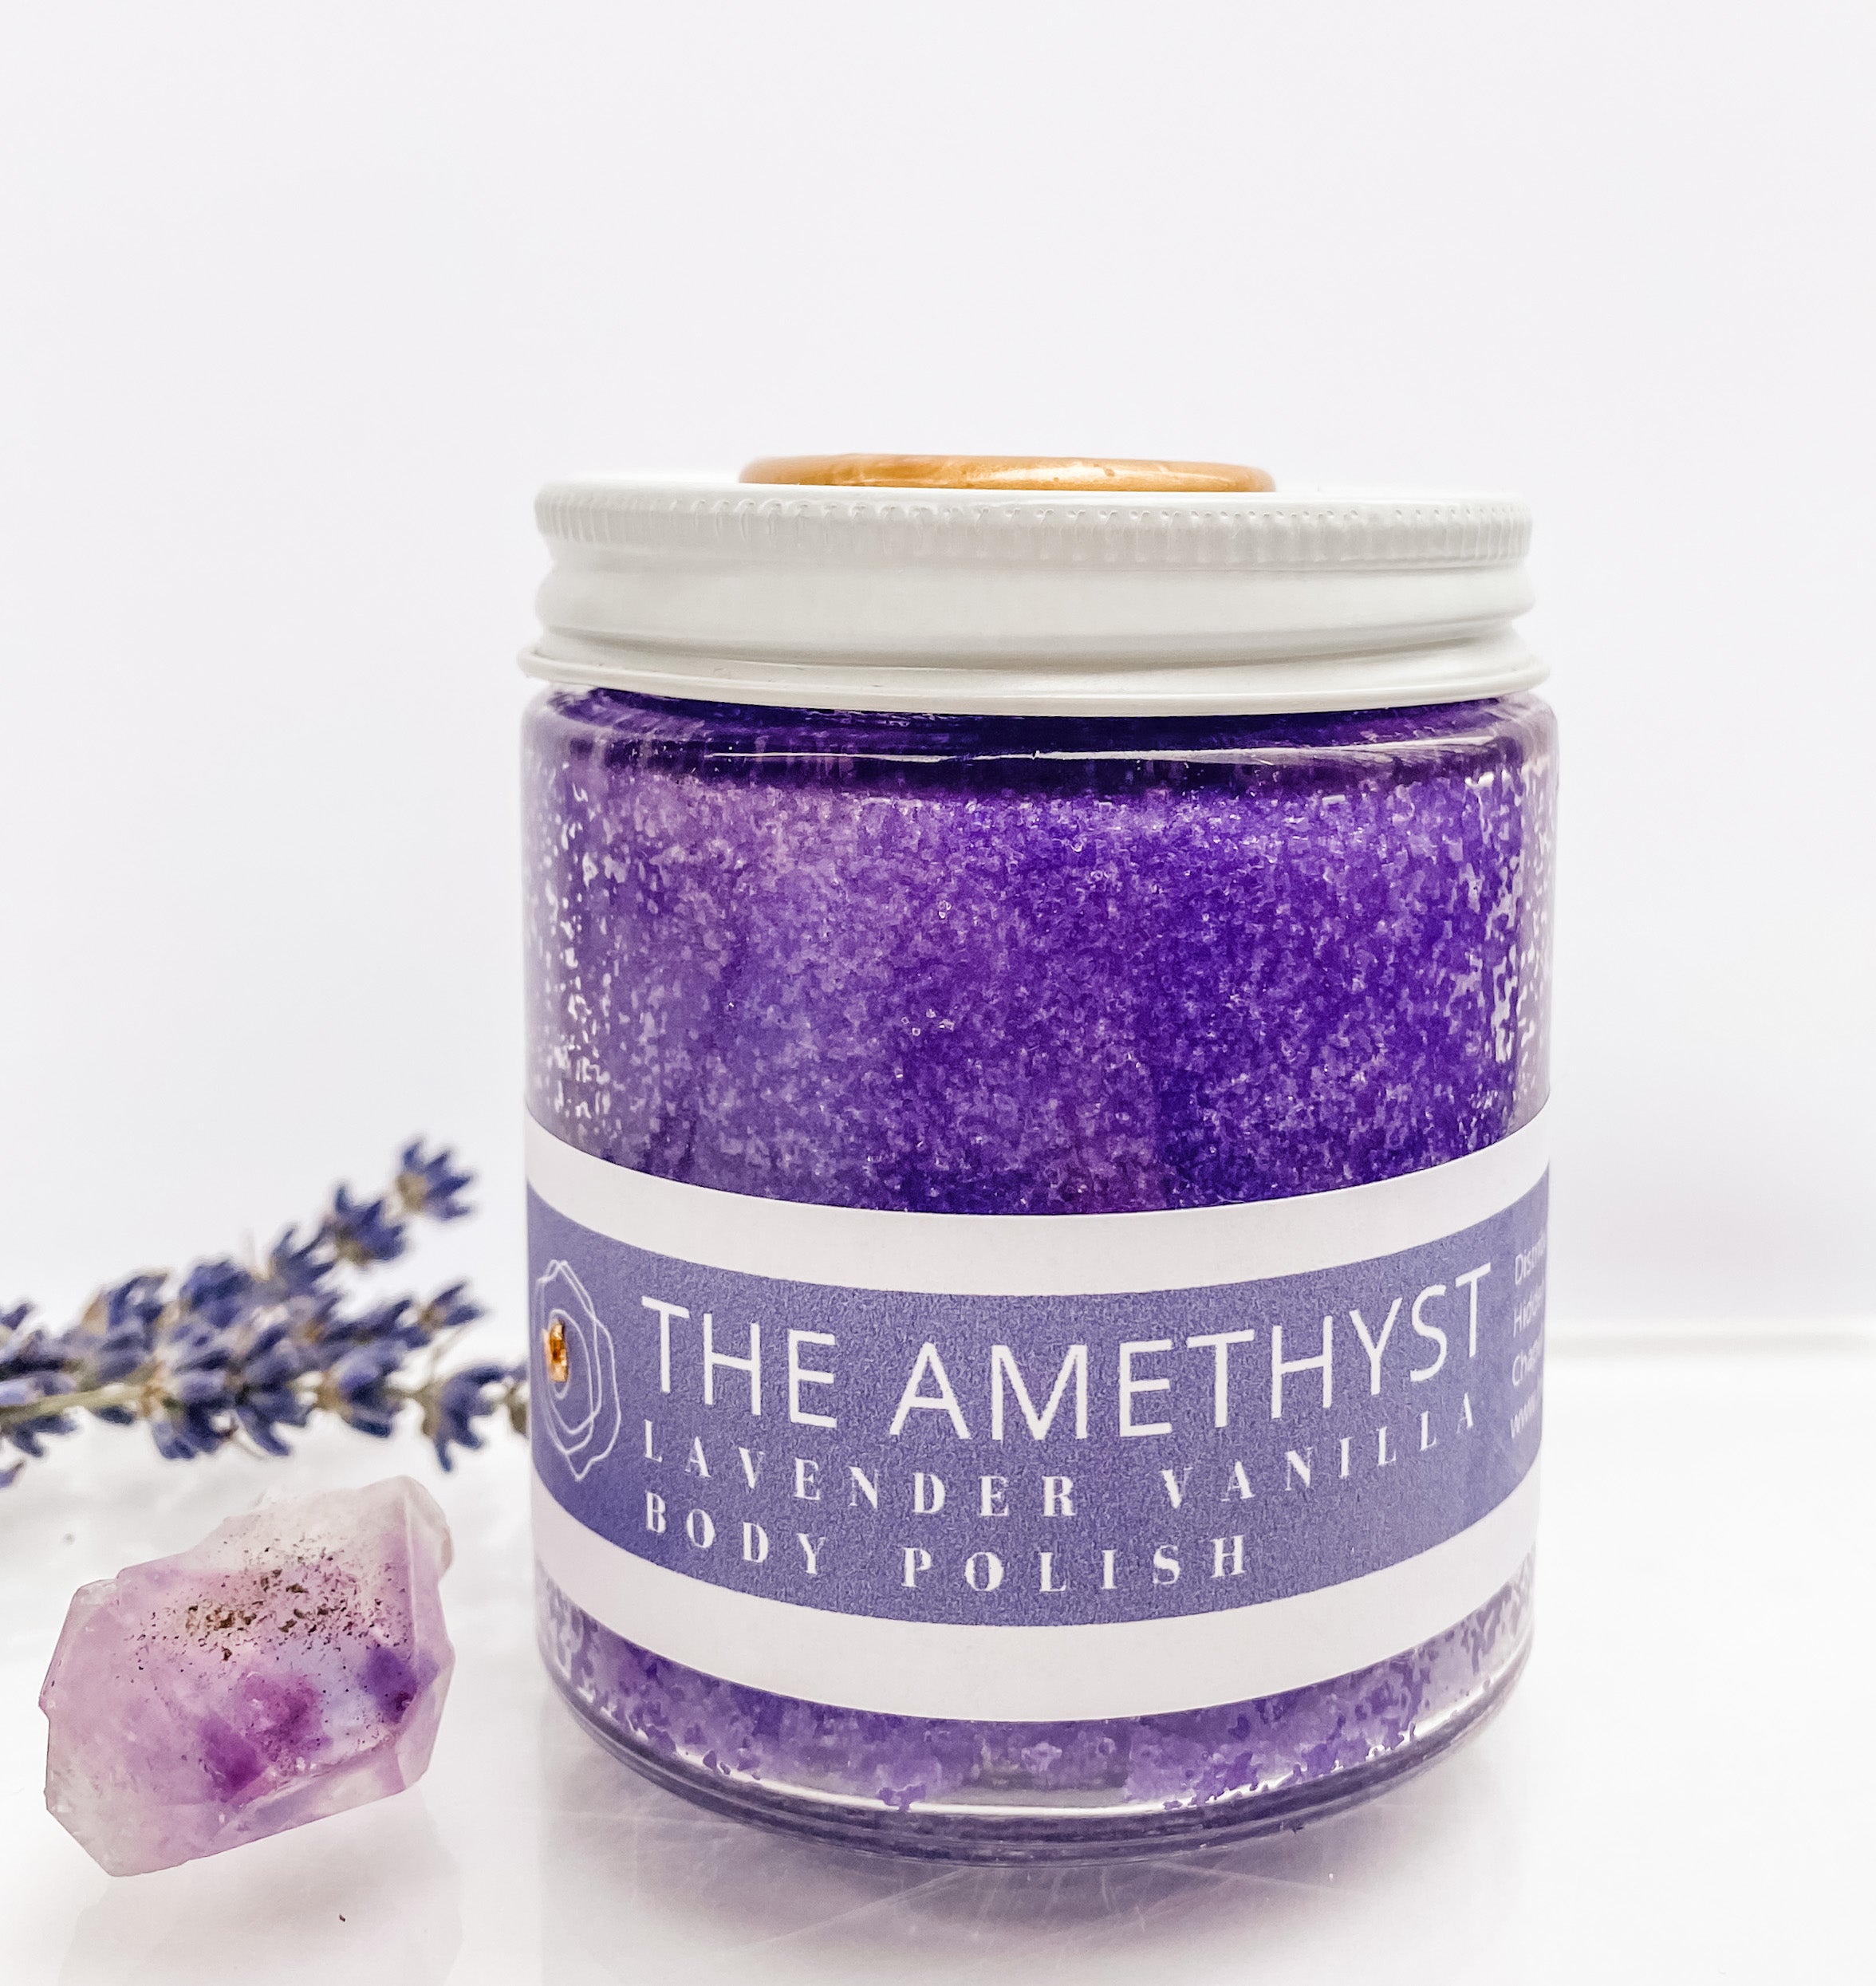 The Amethyst Body Polish - Handmade with Natural Ingredients. Hidden Forest Naturals